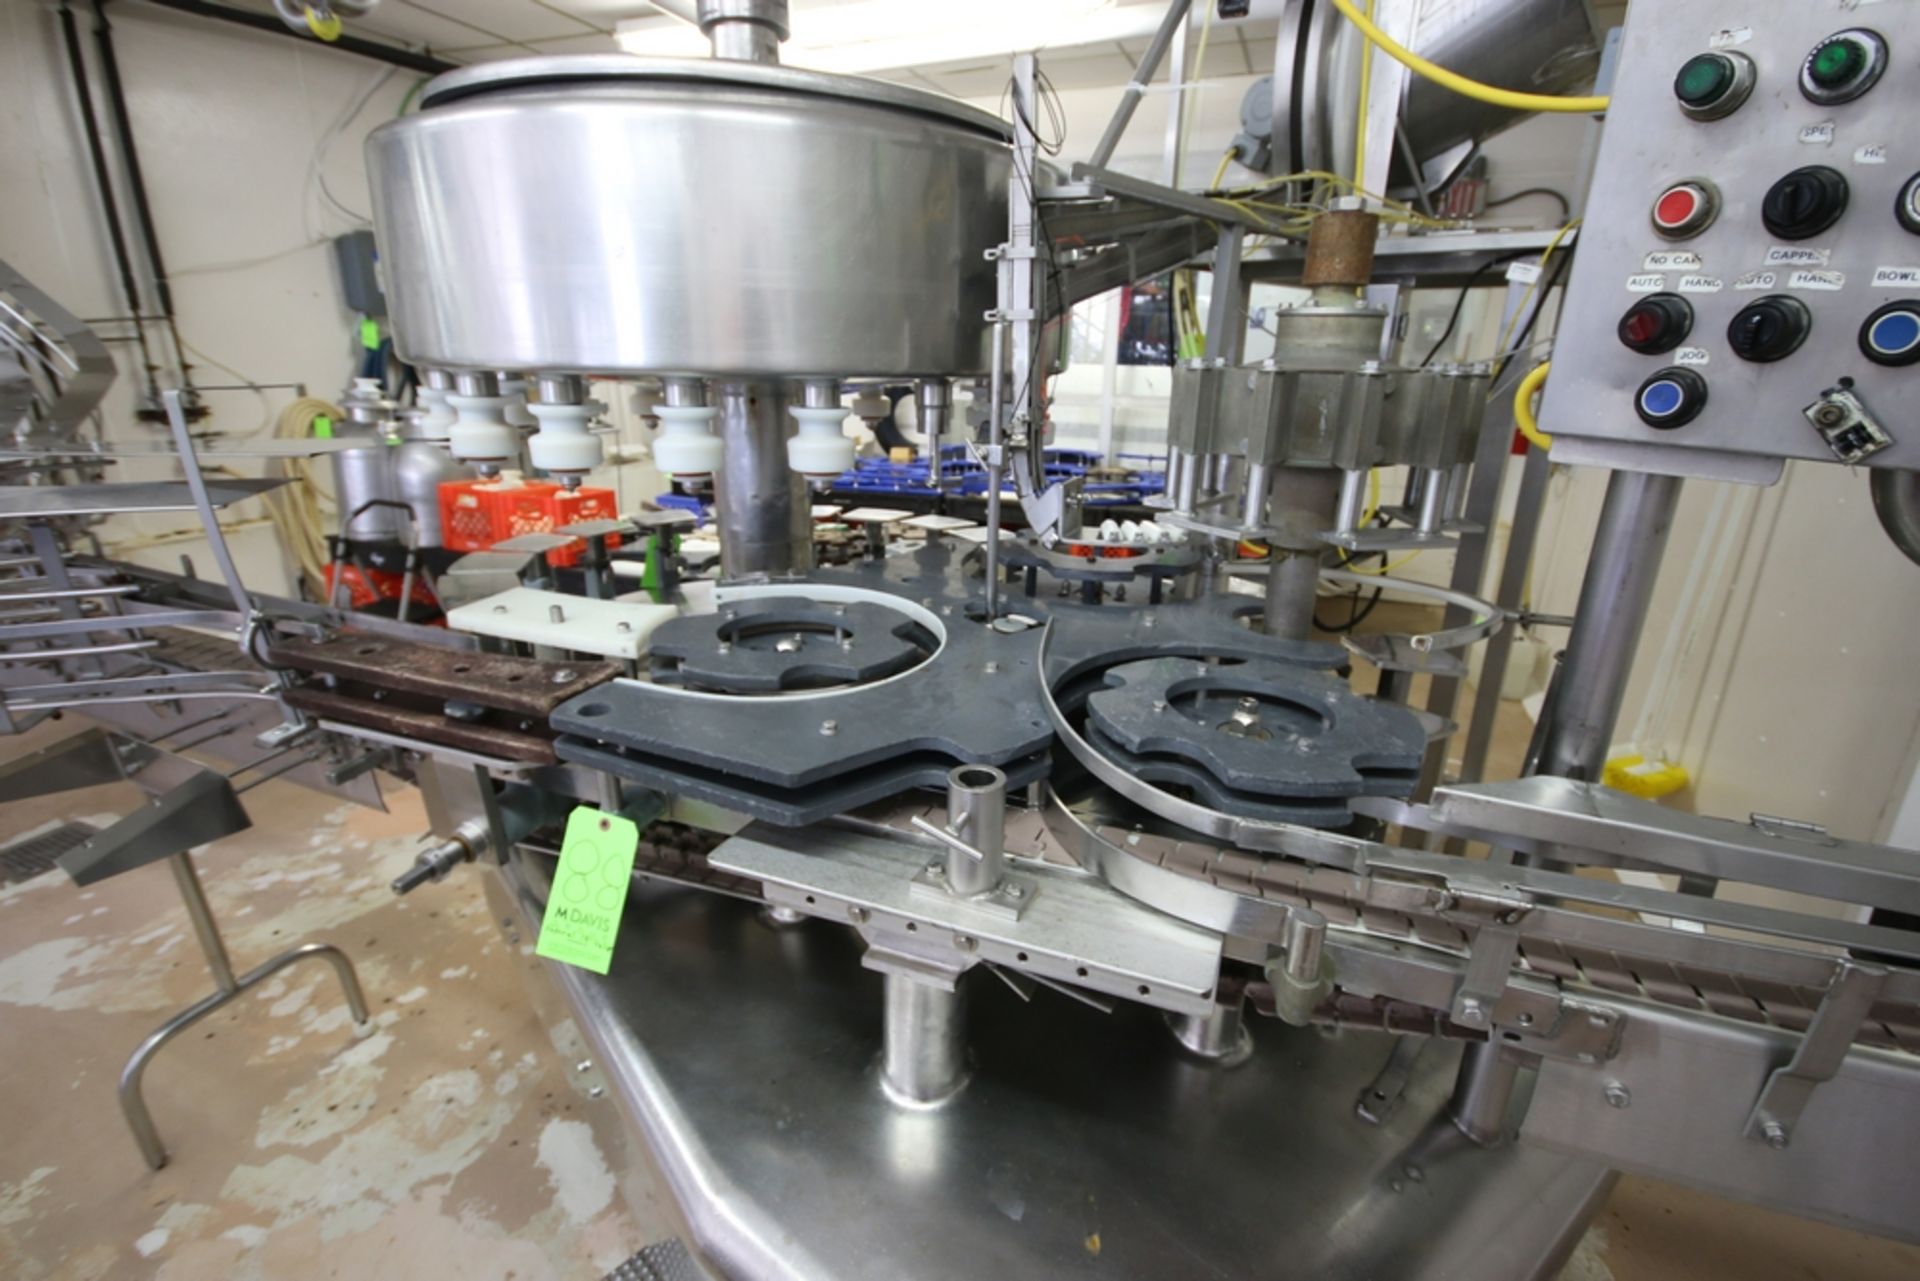 Federal 18-Valve Rotary Filler, with 5-Station Rotary Capper, with Stand Alone Capping Feed - Image 17 of 22